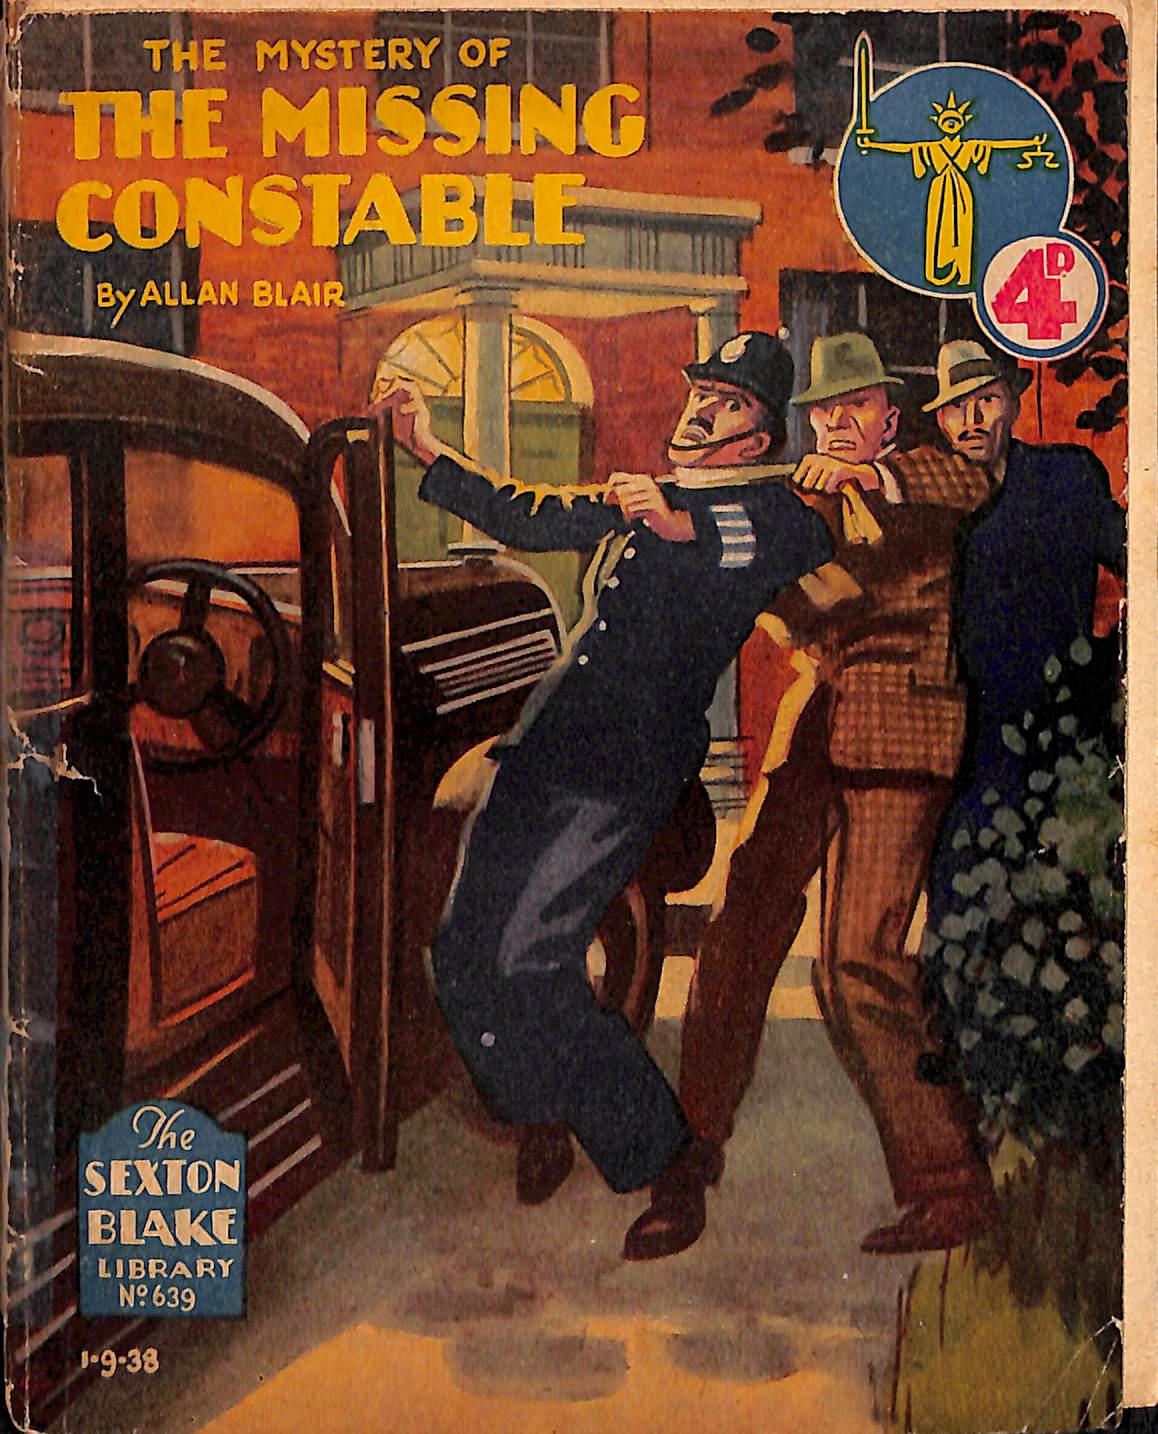 Book Cover For Sexton Blake Library S2 639 - The Mystery of the Missing Constable